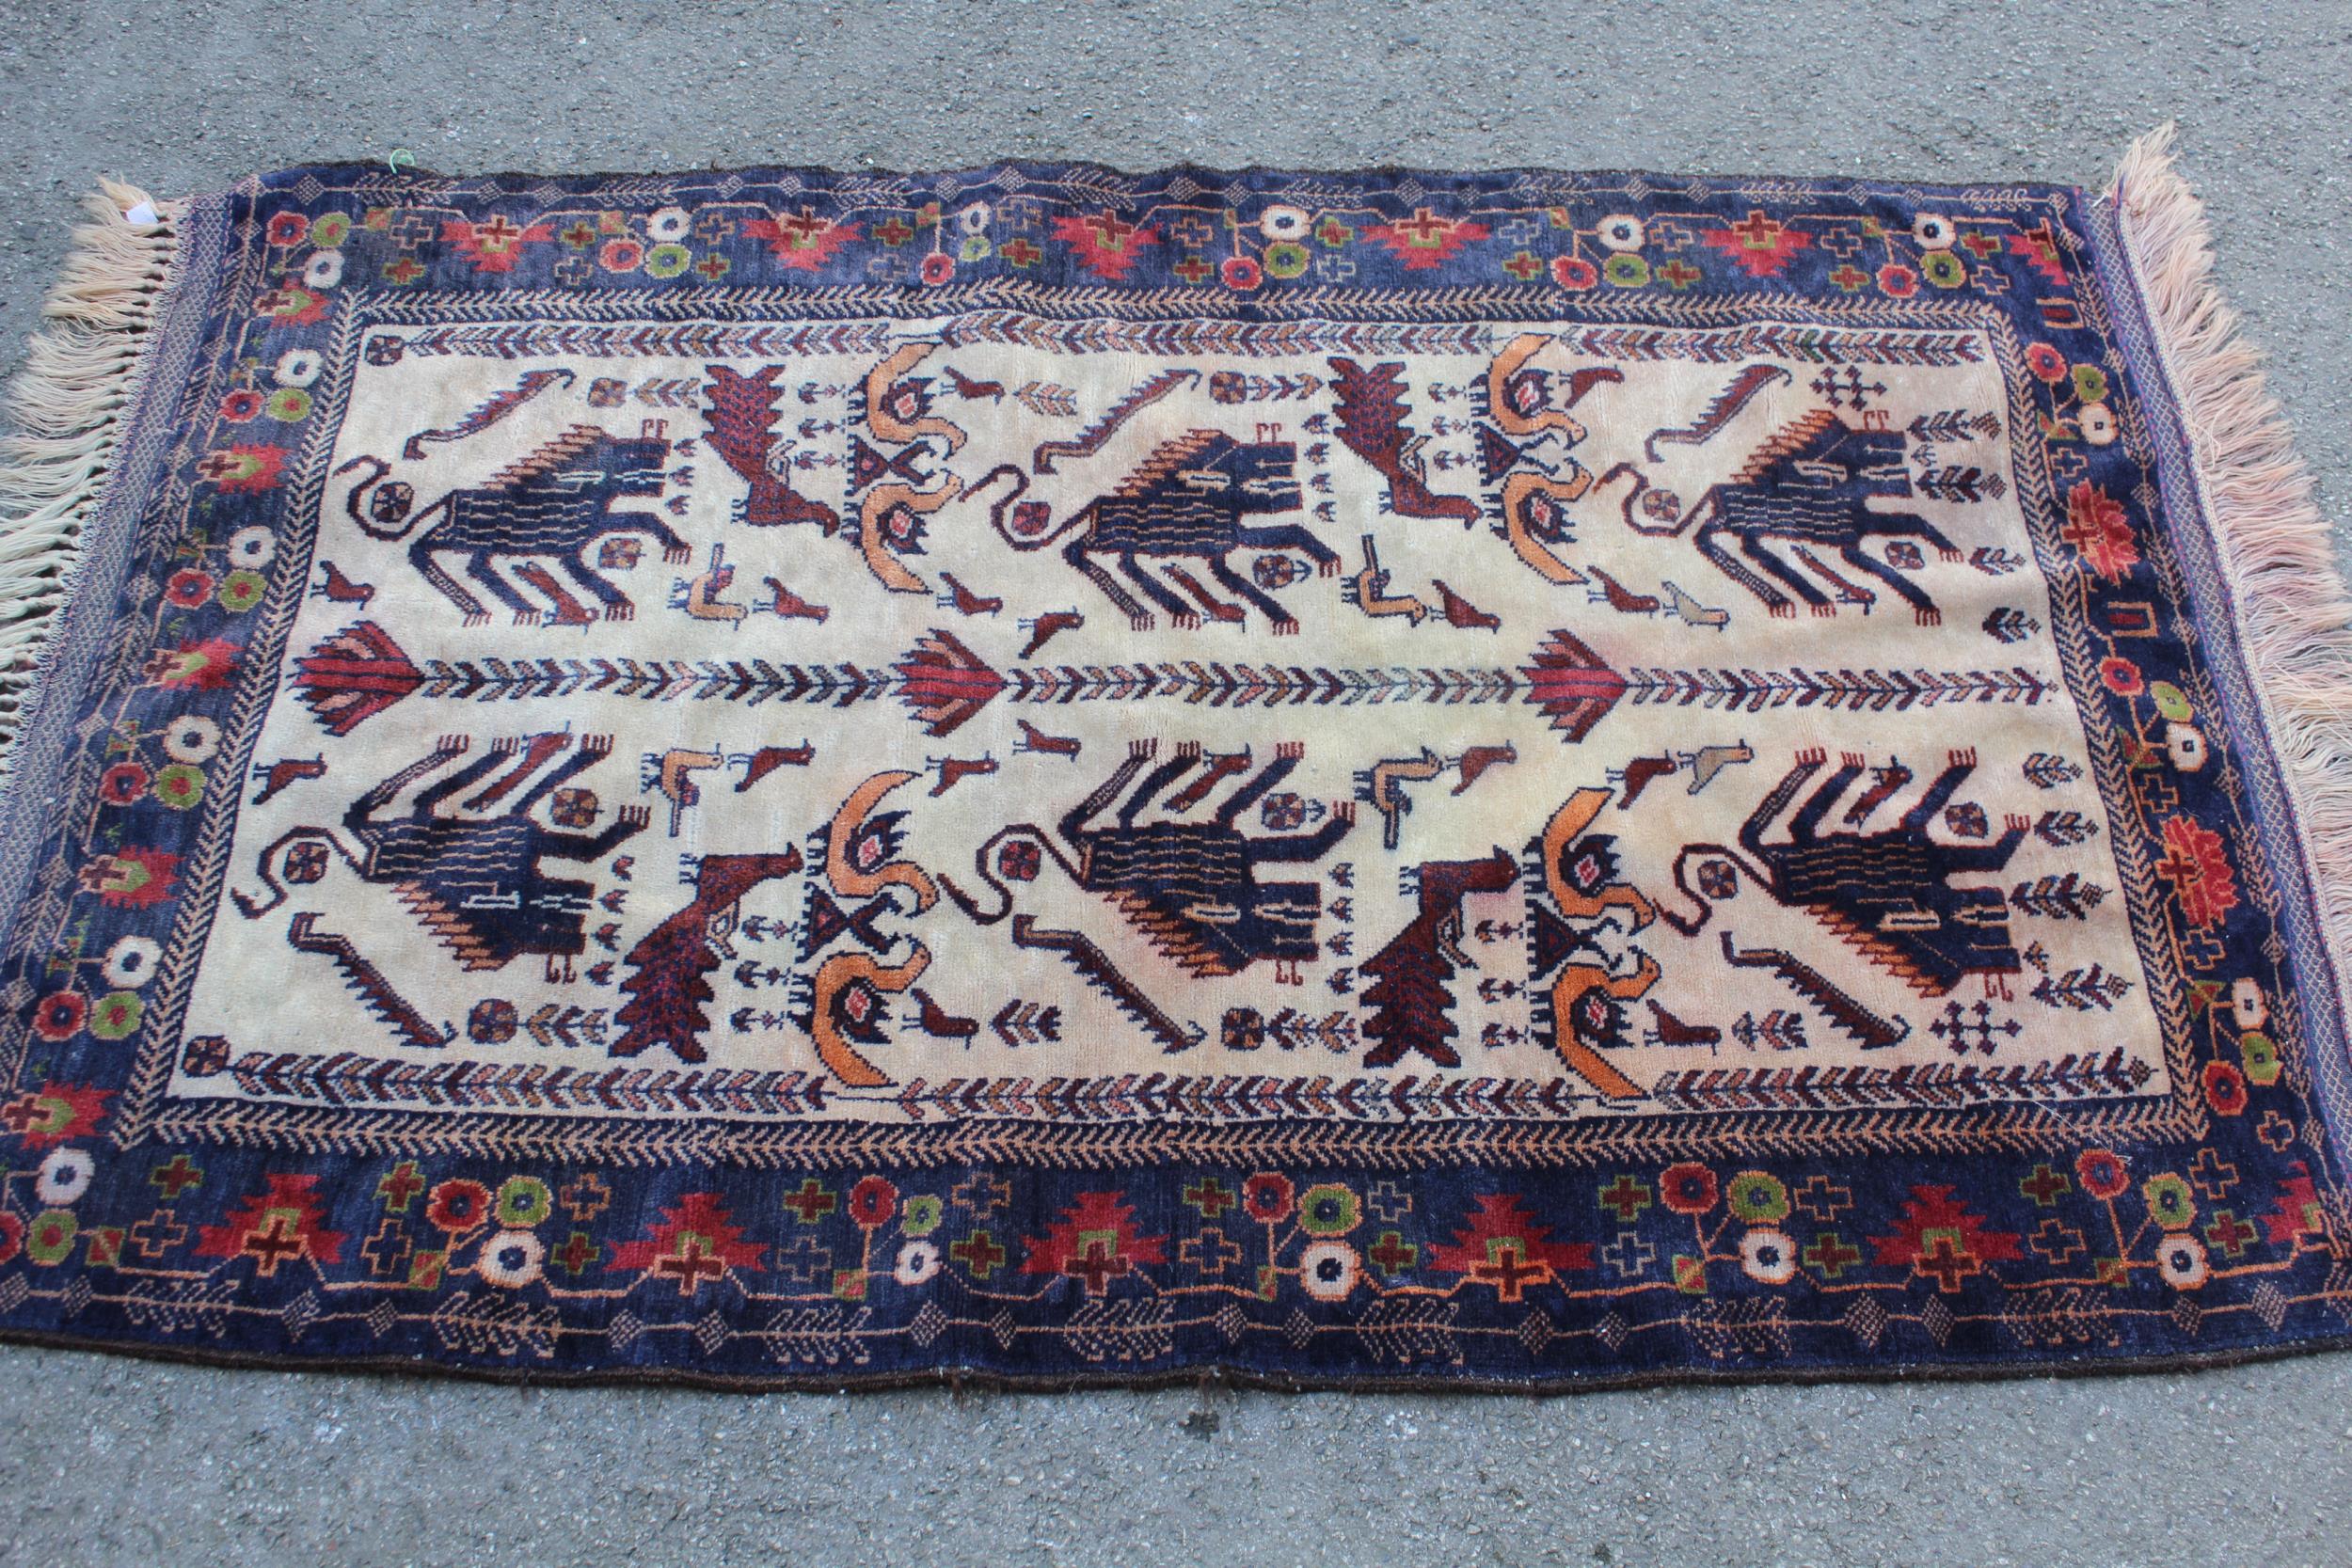 Small modern Belouch rug with animal and bird design on an ivory ground with borders, 4ft 10ins x